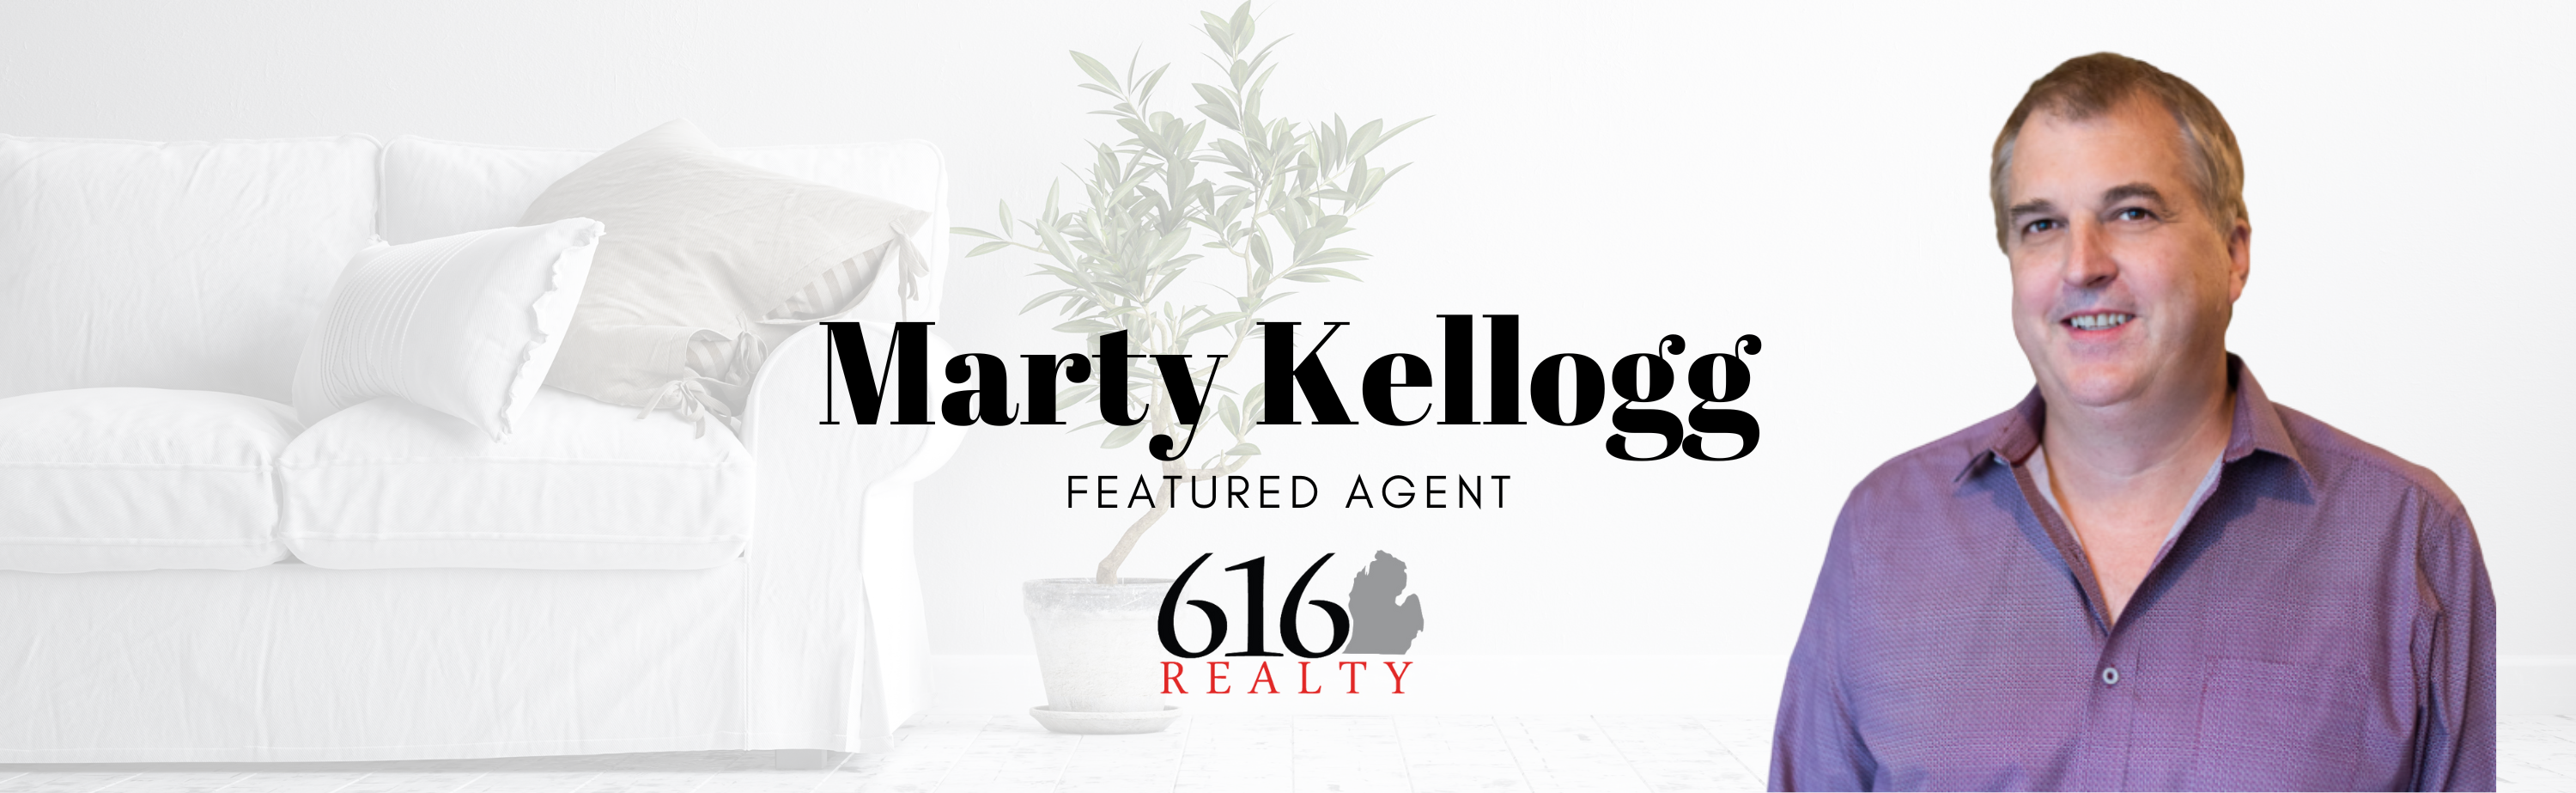 Marty Kellogg - Featured Agent